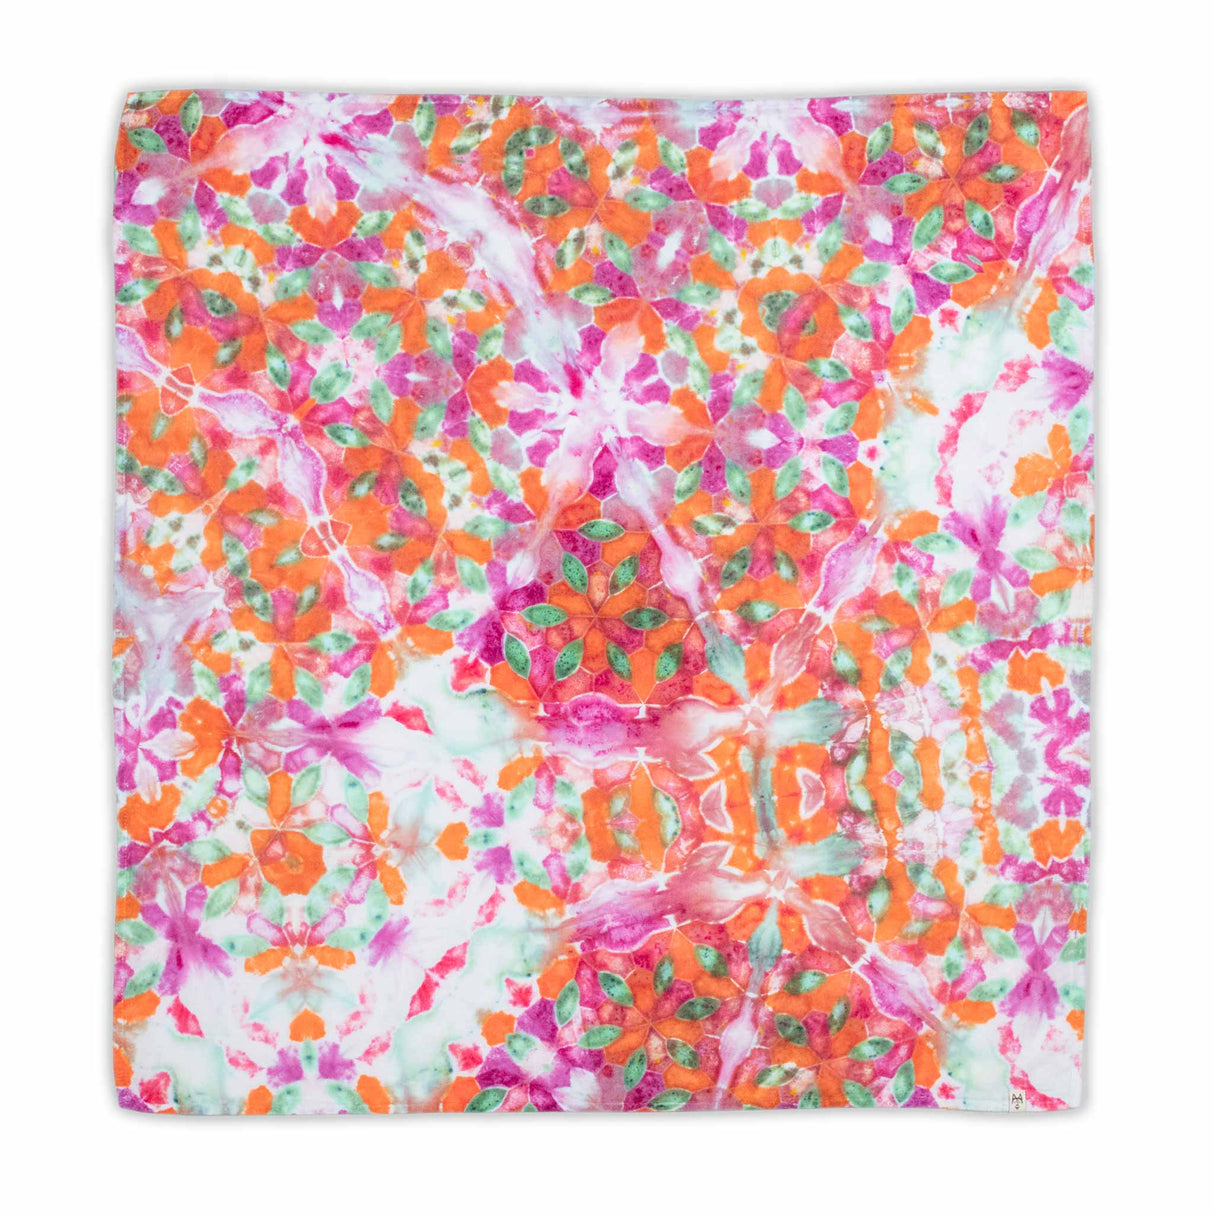 An eye-catching bandana with a tie-dye splash of neon pinks, bright oranges, and leafy greens, forming a pattern resembling a summer garden.